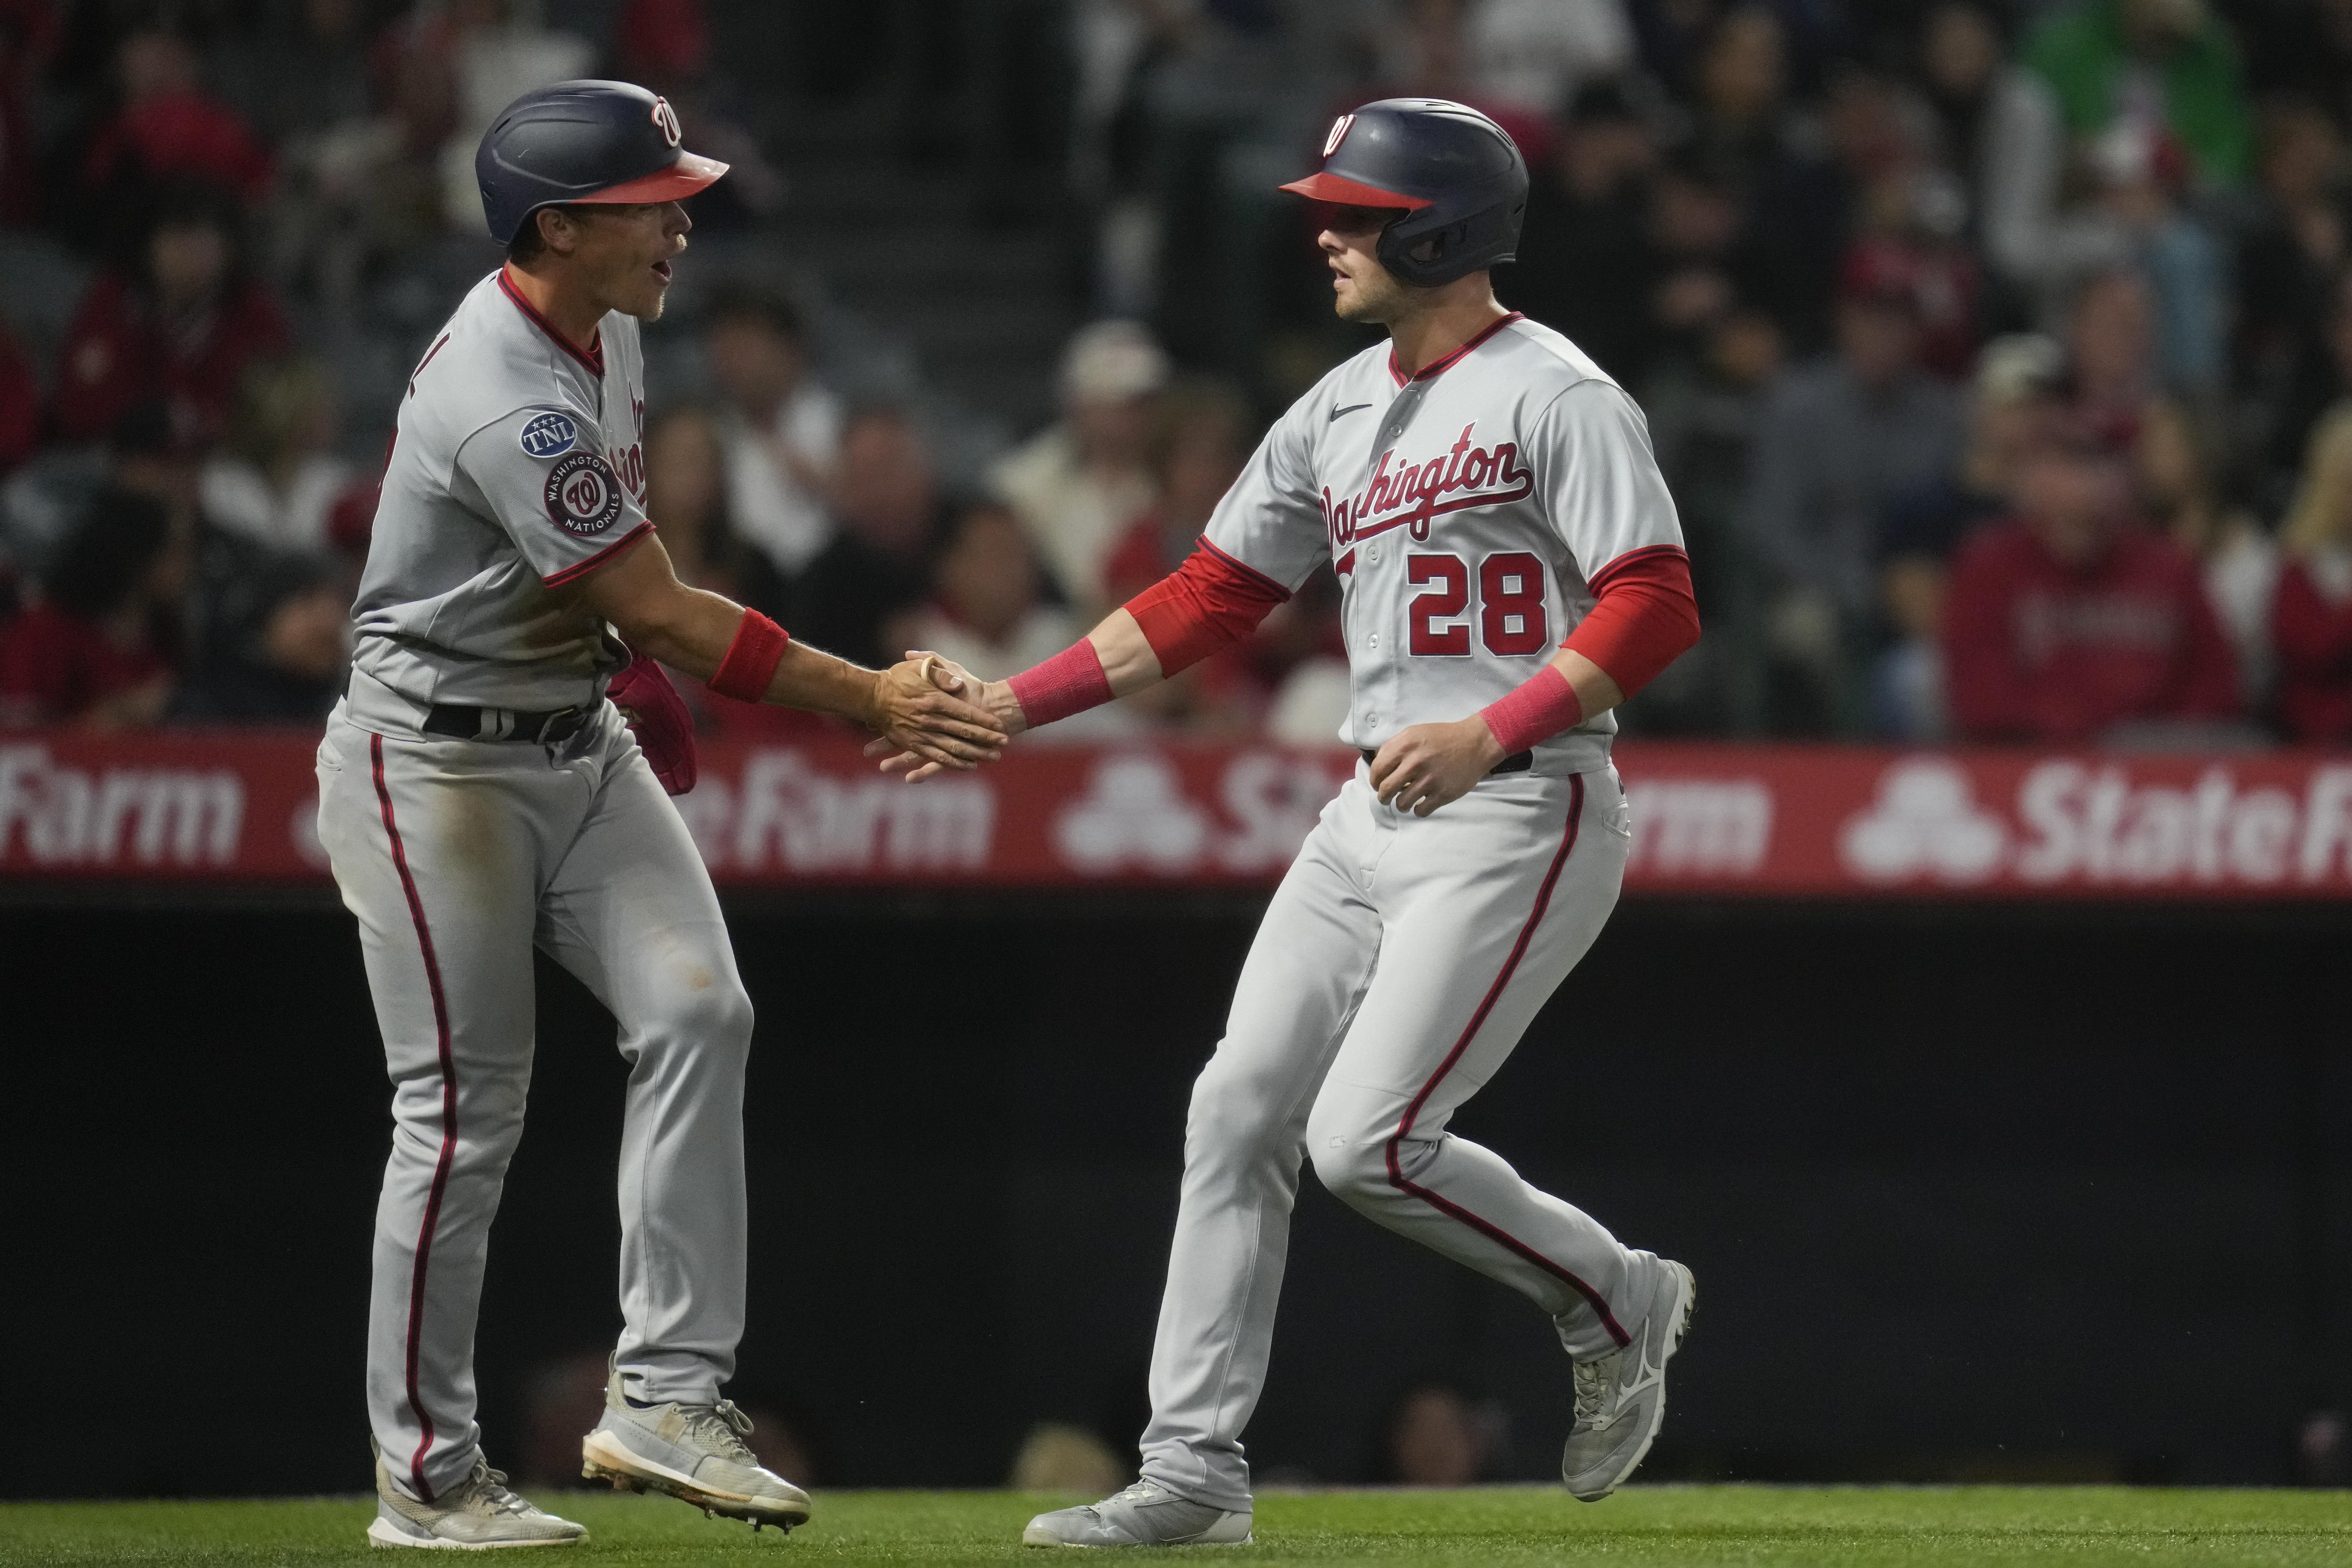 Have the Nats found their leadoff man in Lane Thomas? - Federal